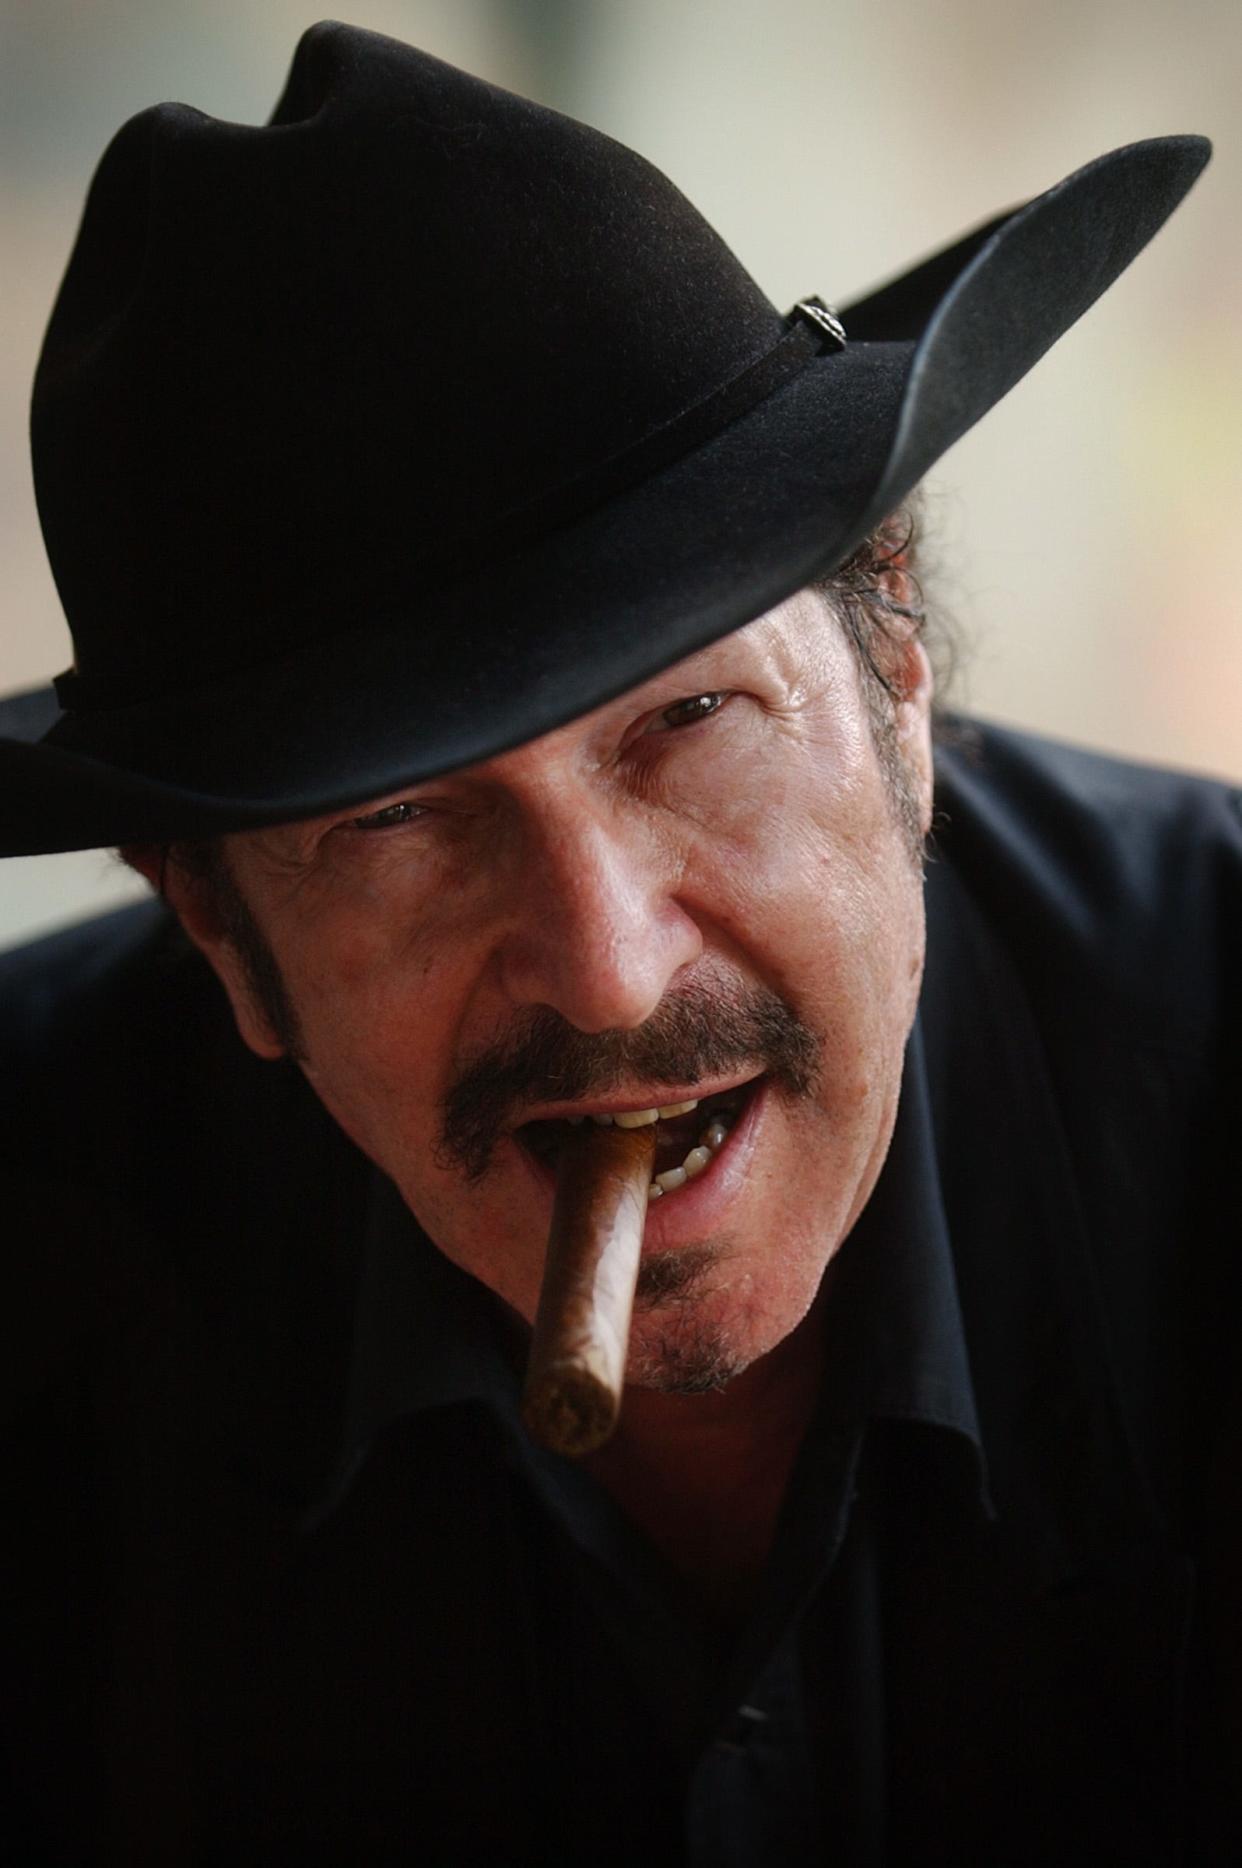 Kinky Friedman, writer, musician, humorist, philanthropist and political candidate has died. He was 79.